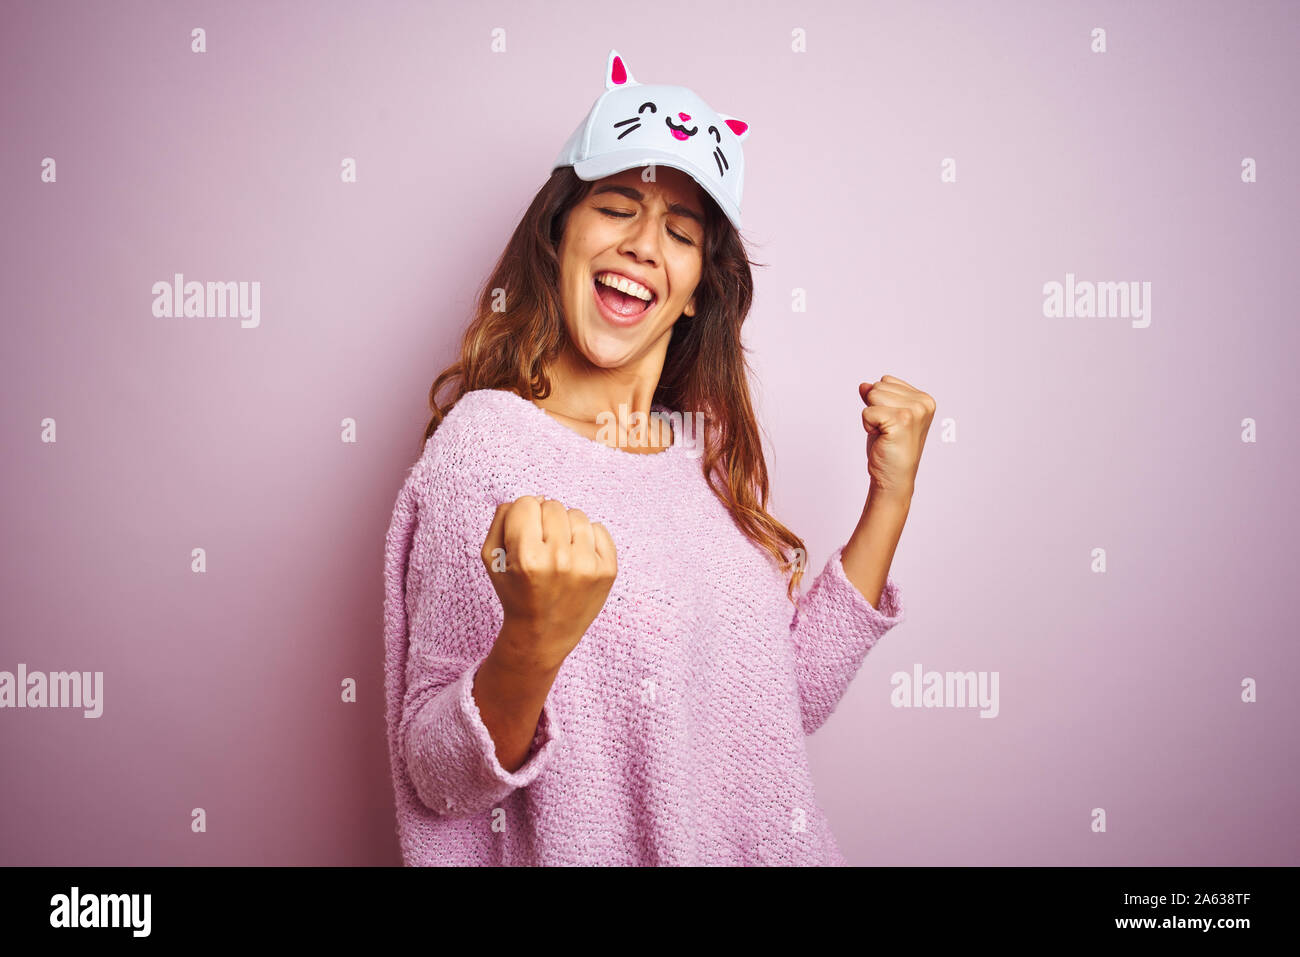 Young beautiful woman wearing funny cat cap standing over pink isolated background very happy and excited doing winner gesture with arms raised, smili Stock Photo